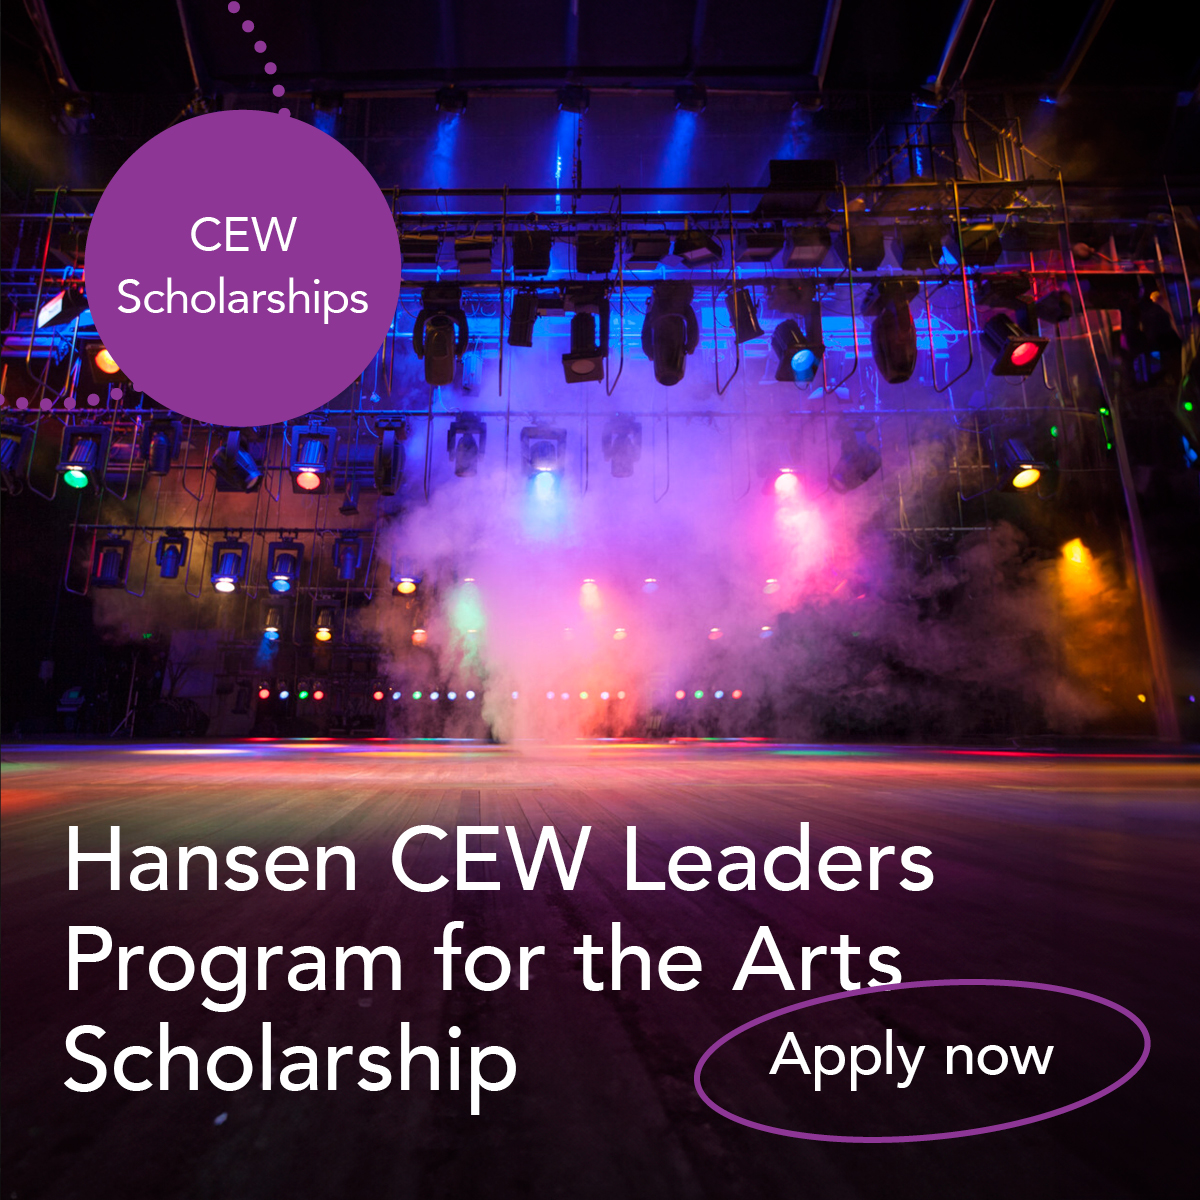 Hansen CEW Leaders Program for the Arts Scholarship is now open! Five women working in the Arts have an incredible opportunity to participate in the CEW Leaders Program. Apply today or forward on to someone who would benefit - hubs.la/Q02t5Lkk0